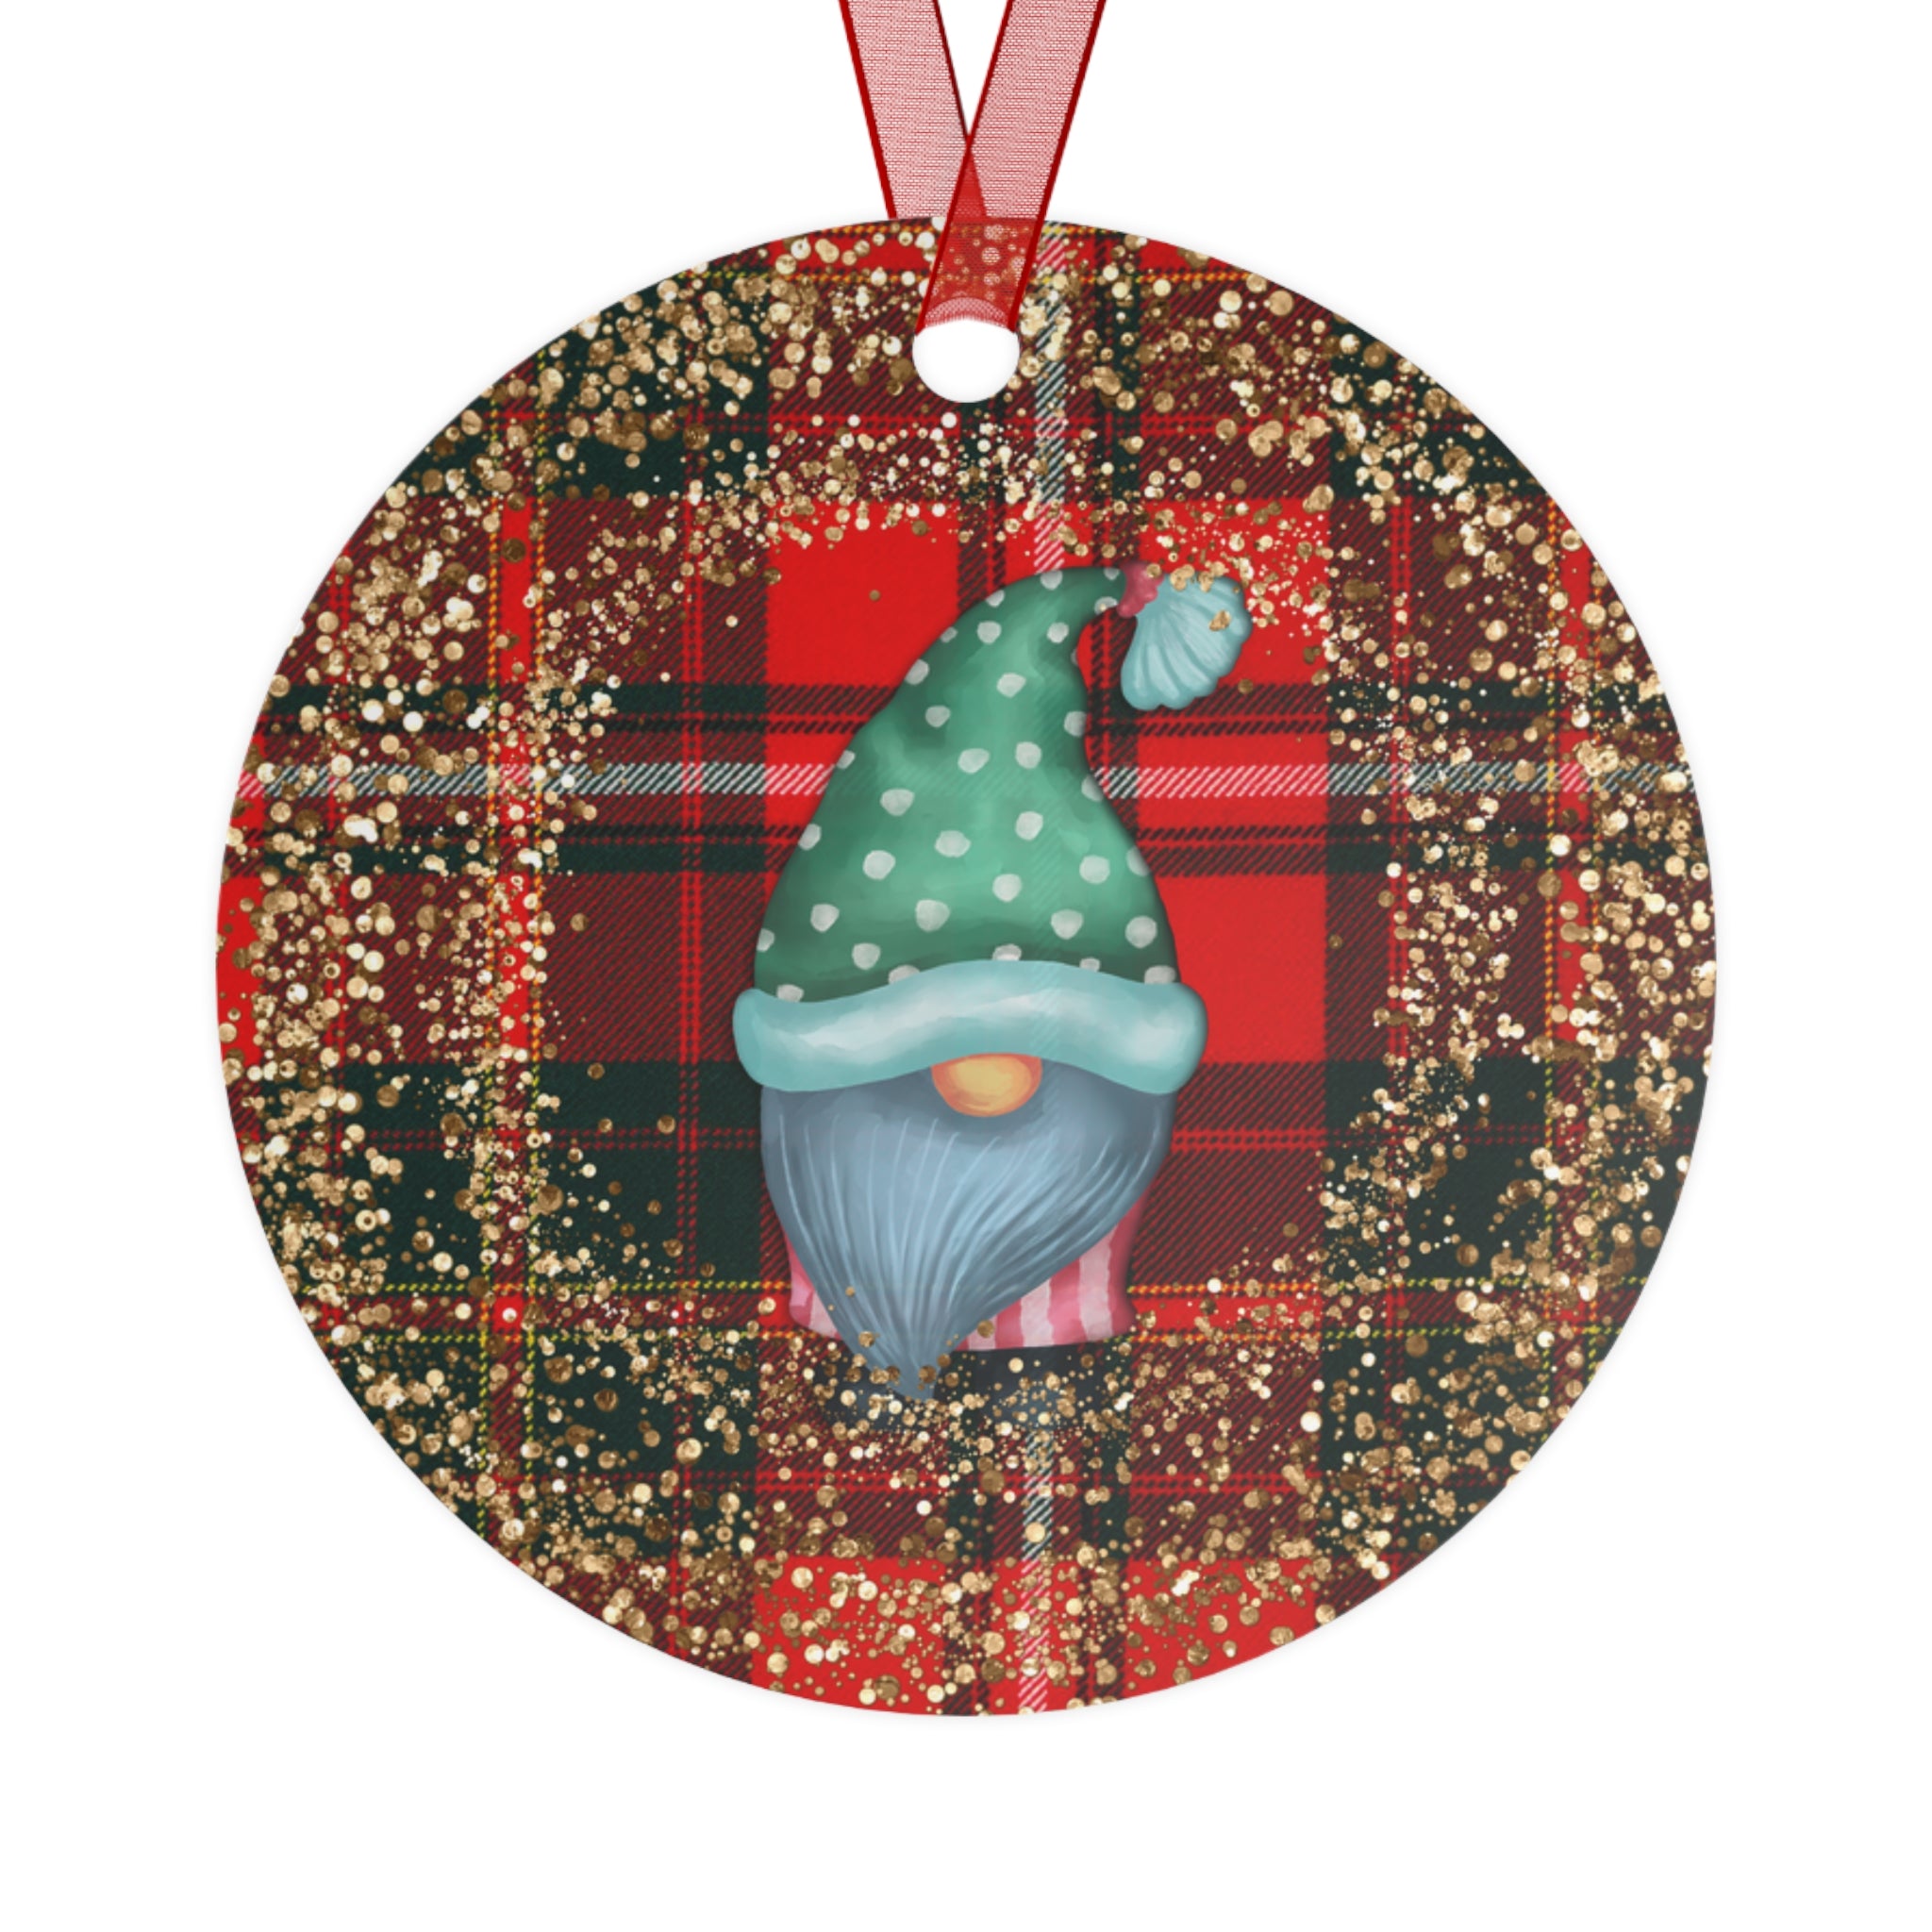 Gnome Gift Christmas Metal Ornaments Gift for Gnome Lovers Christmas Gift with Santa Gnome